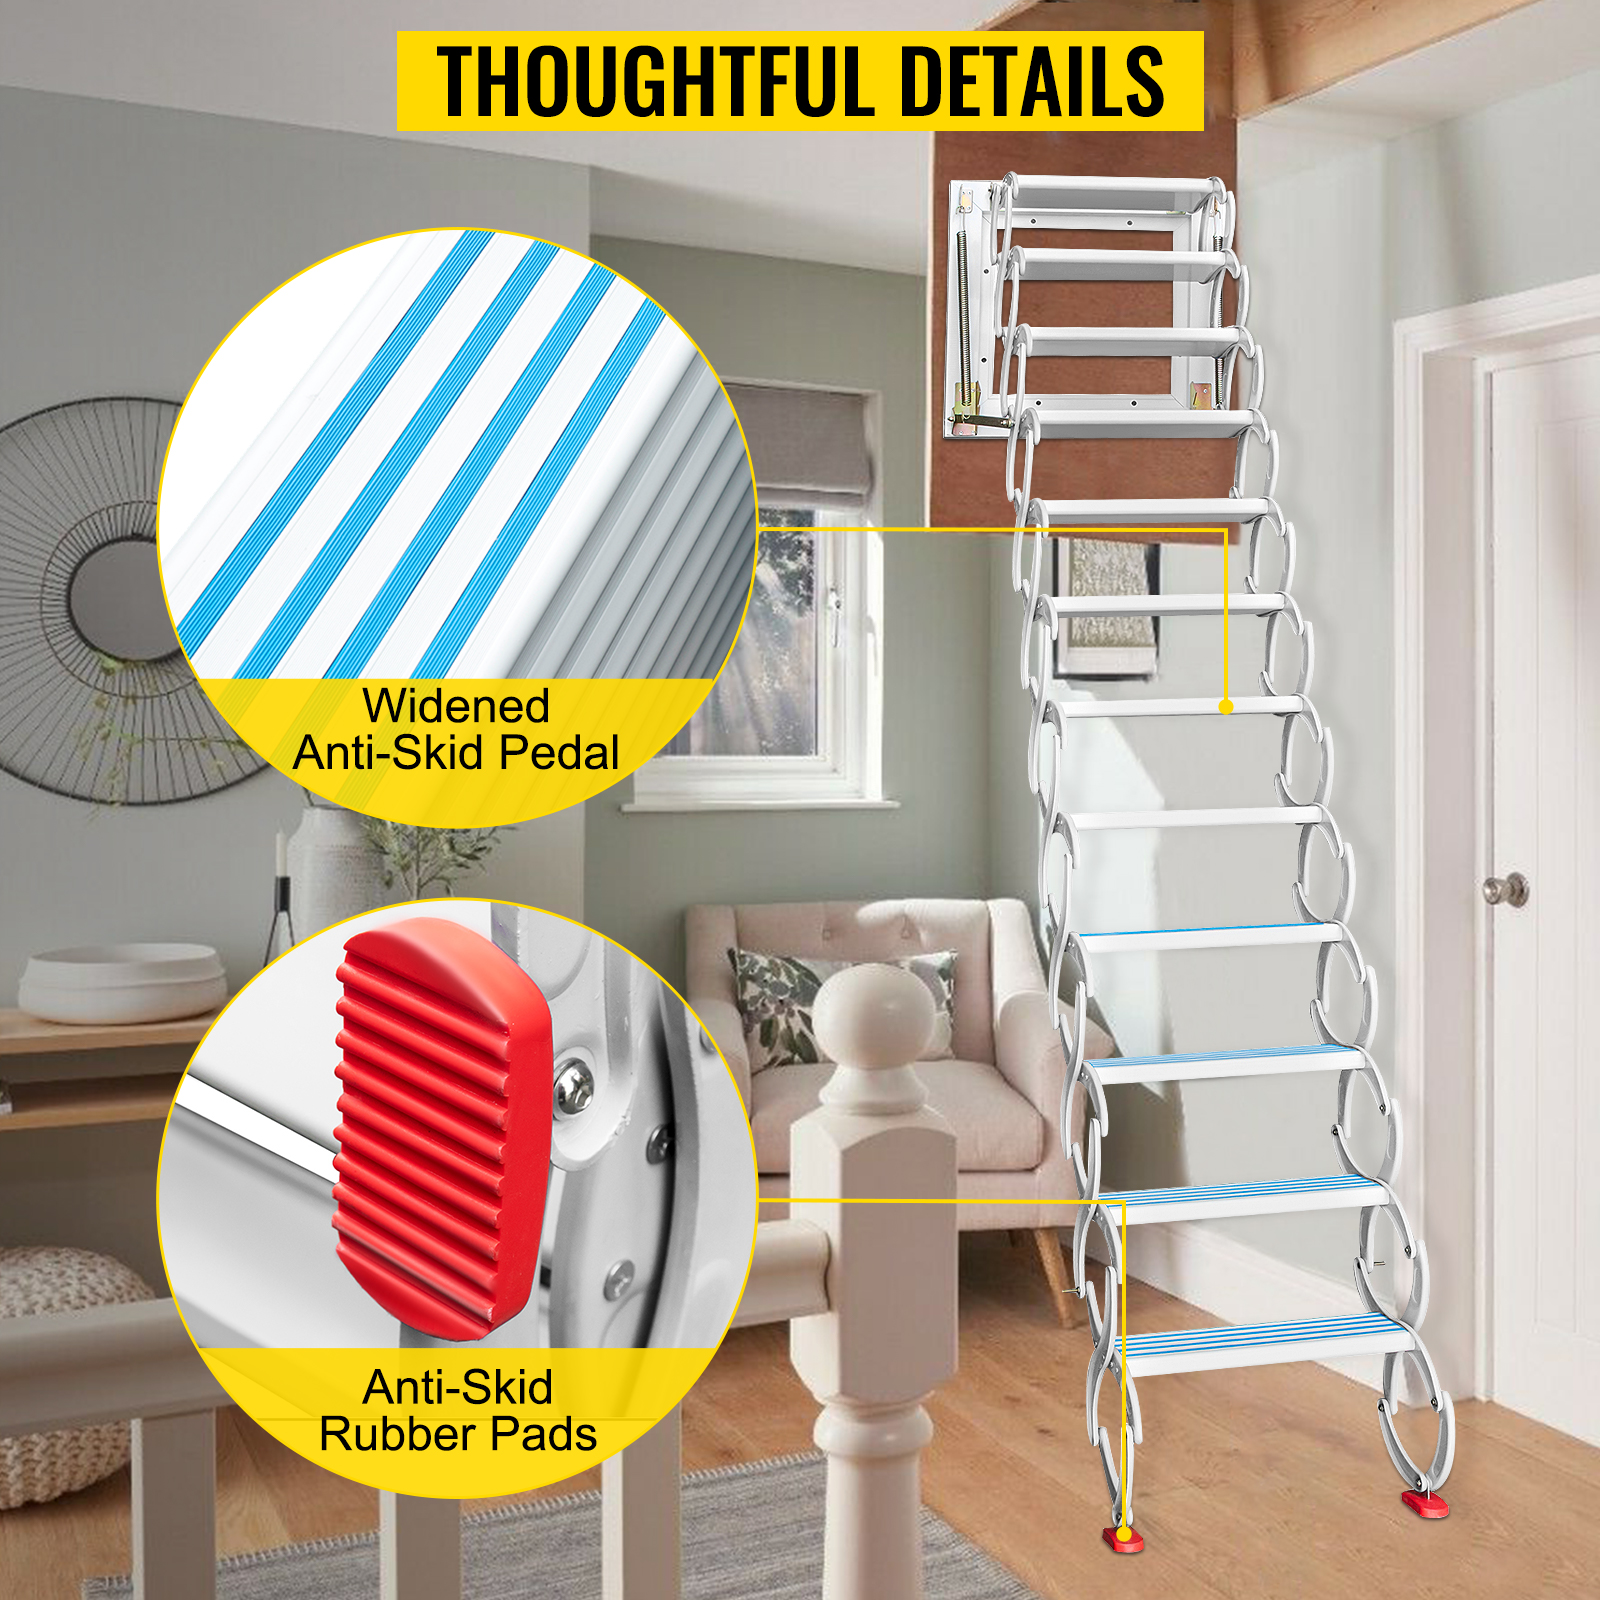 VEVORbrand Attic Steps Pull Down 12 Steps Attic Stairs Alloy Attic Access Ladder, White Pulldown, Wall-mounted Folding Stairs For Attic, Retractable Attic Ladder With Armrests, 9.8 Feet Height - image 4 of 9